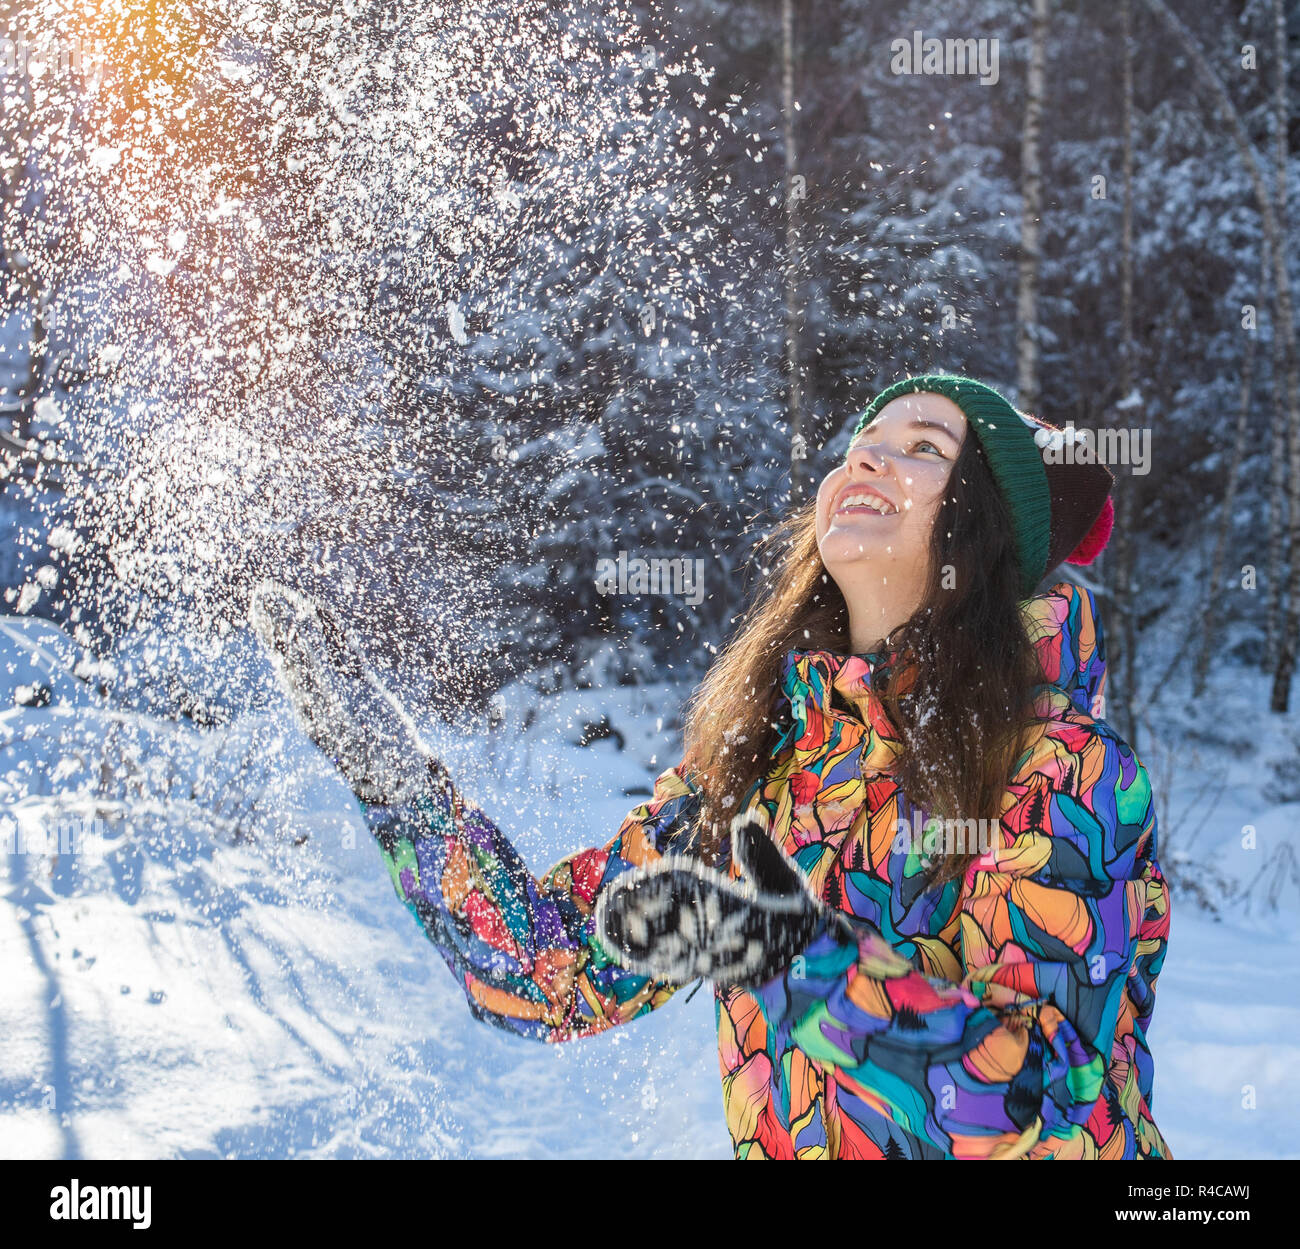 Happy winter fun woman throwing snow banner. Panorama crop of outdoor lifestyle girl playing in snow outside laughing in yellow coat, hat, gloves and scarf. Stock Photo